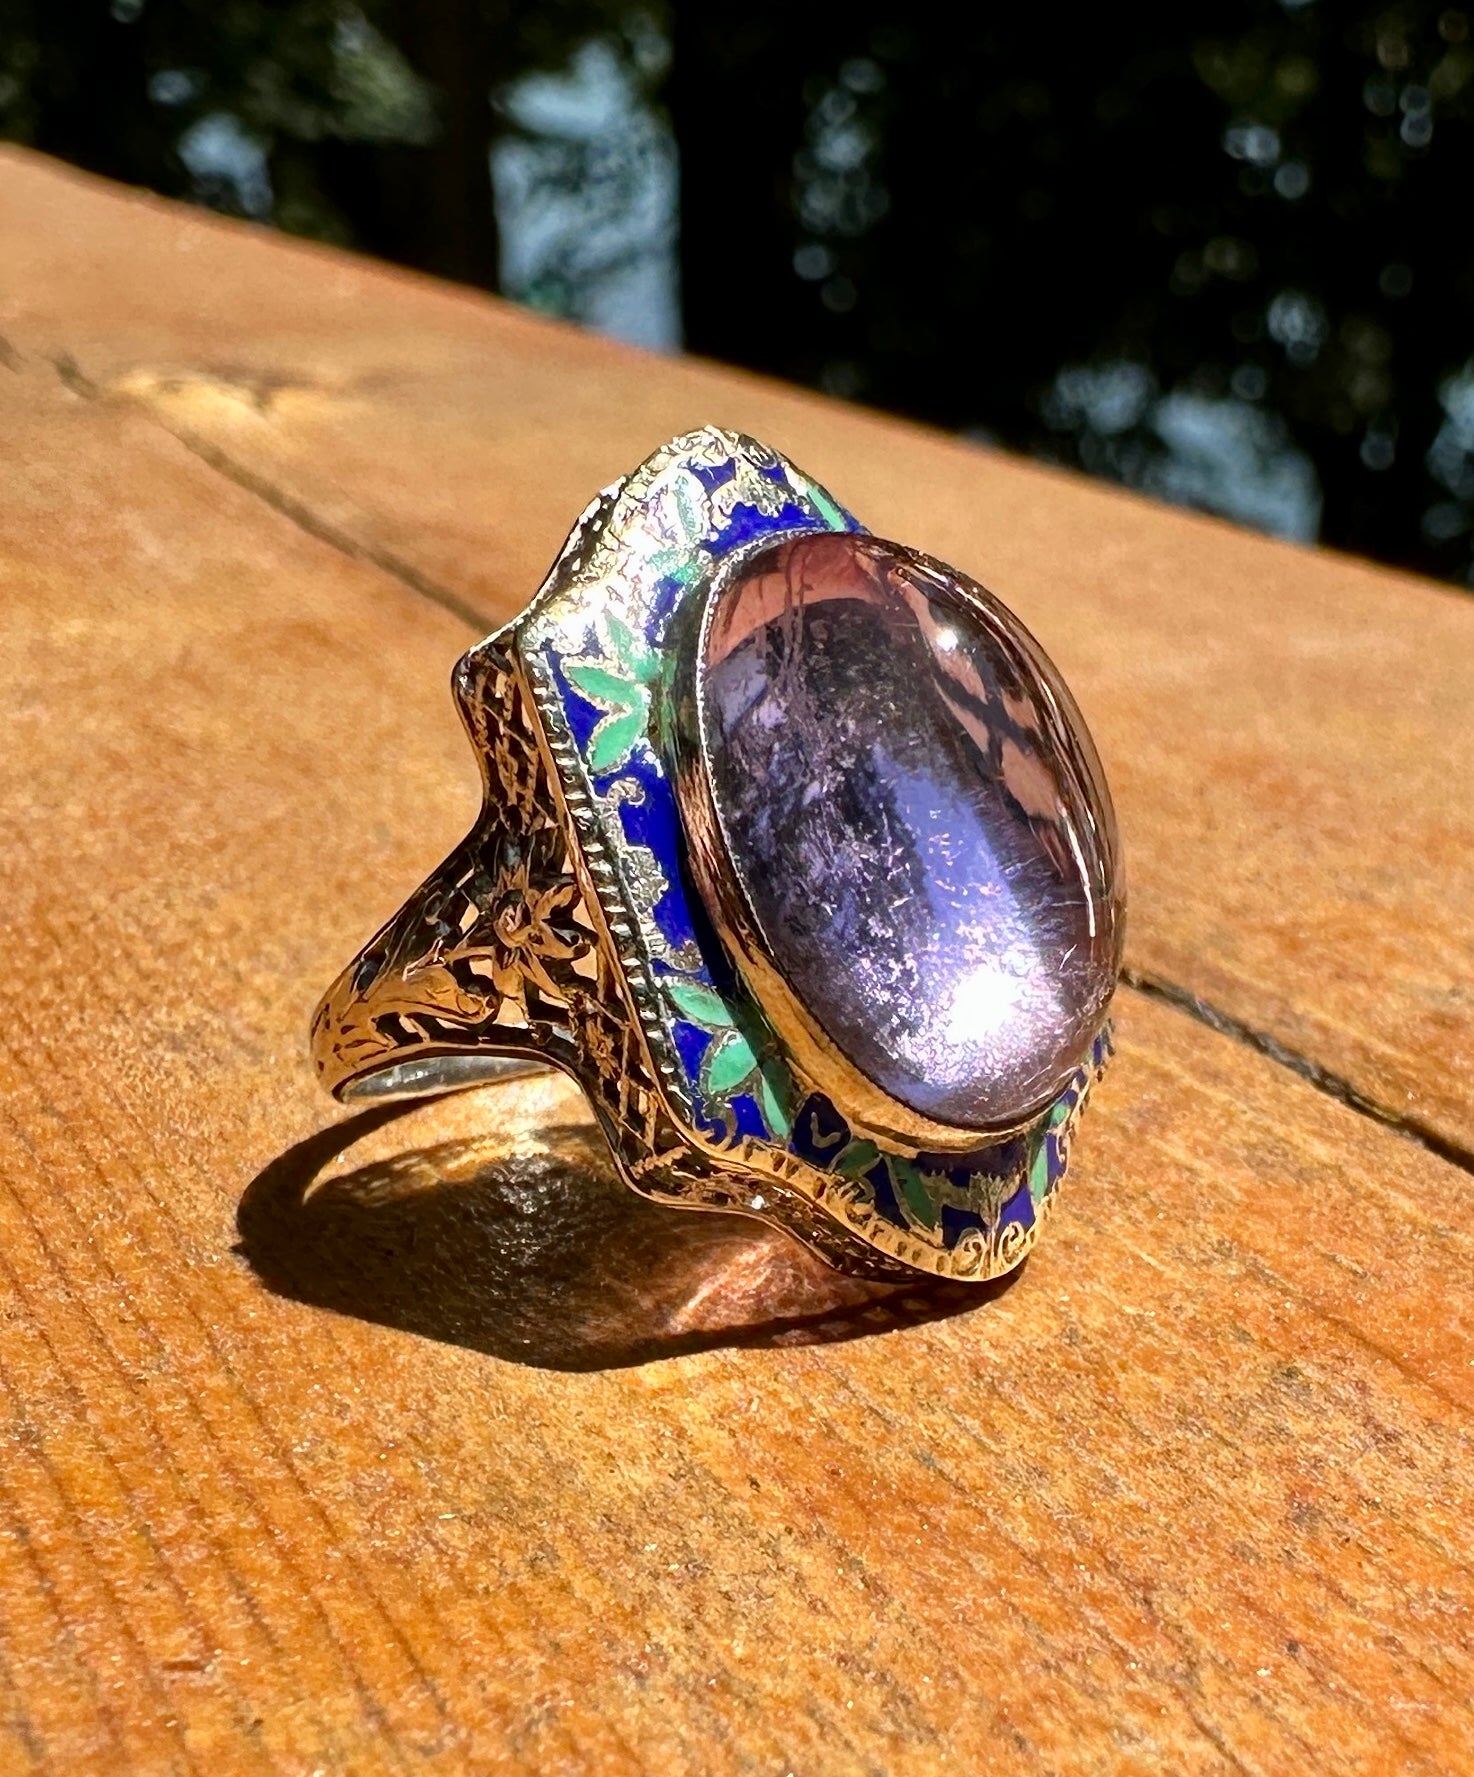 This is an extraordinary antique Art Deco Enamel Ring with a stunning nine Carat Amethyst in the center with gorgeous green and blue enamel decoration in 14 Karat White Gold surrounding the Amethyst cabochon.  The amethyst is large and magnificent